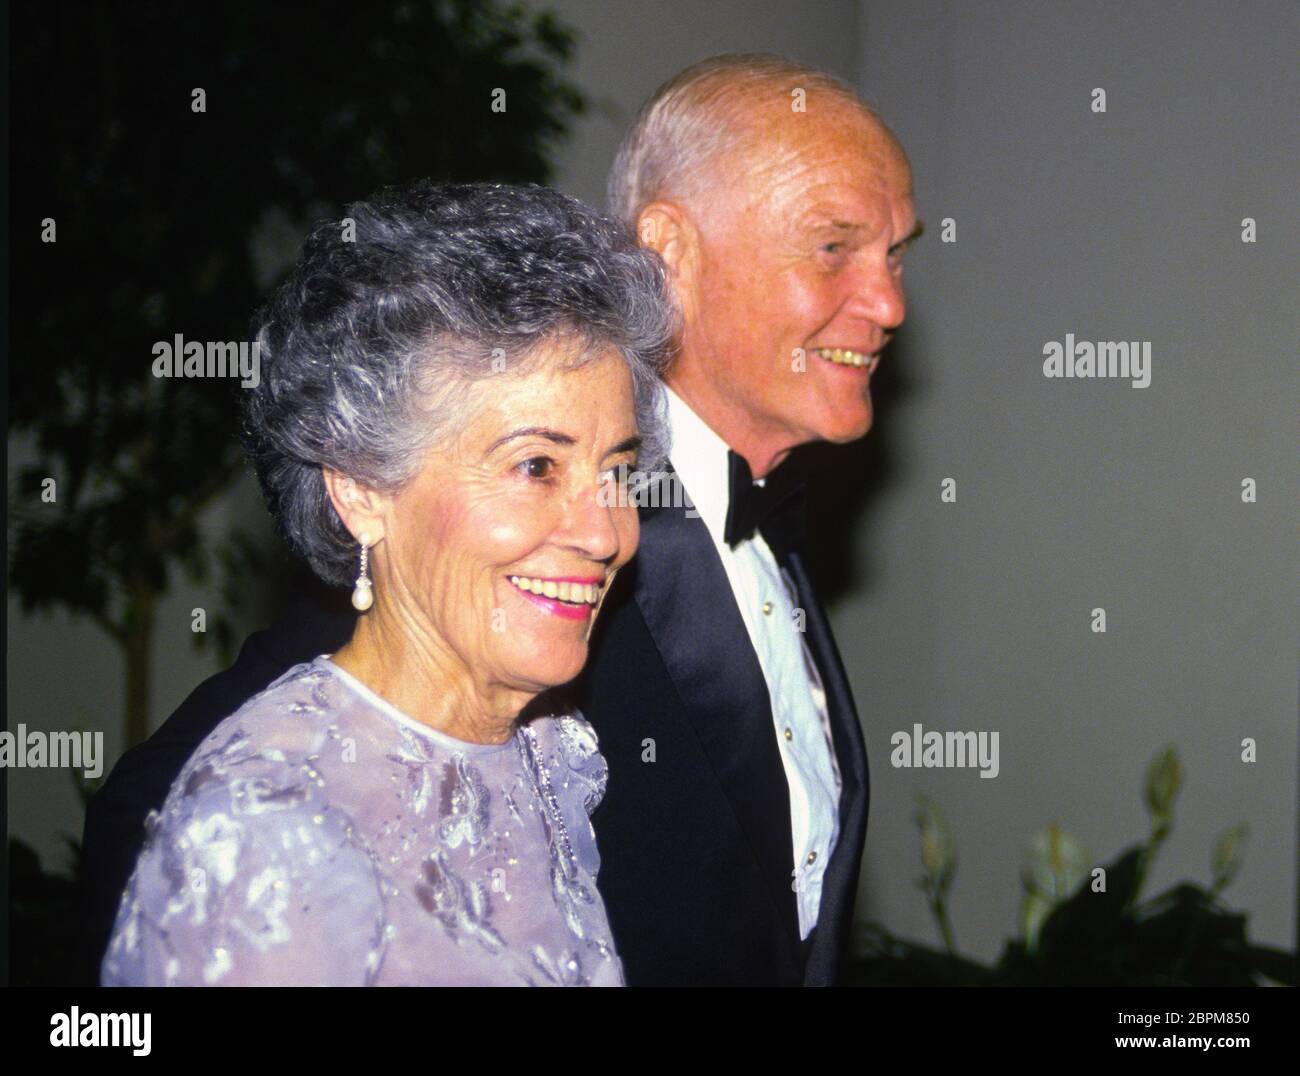 ***FILE PHOTO*** Annie Glenn, wife of John Glenn, Has Passed Away Of COVID-19 Complications. United States Senator John H. Glenn, Jr. (Democrat of Ohio) and his wife, Annie, arrive at the State Dinner in honor of Prime Minister Benazir Bhutto of Pakistan on June 6, 1989.Credit: Ron Sachs/CNP /MediaPunch Stock Photo